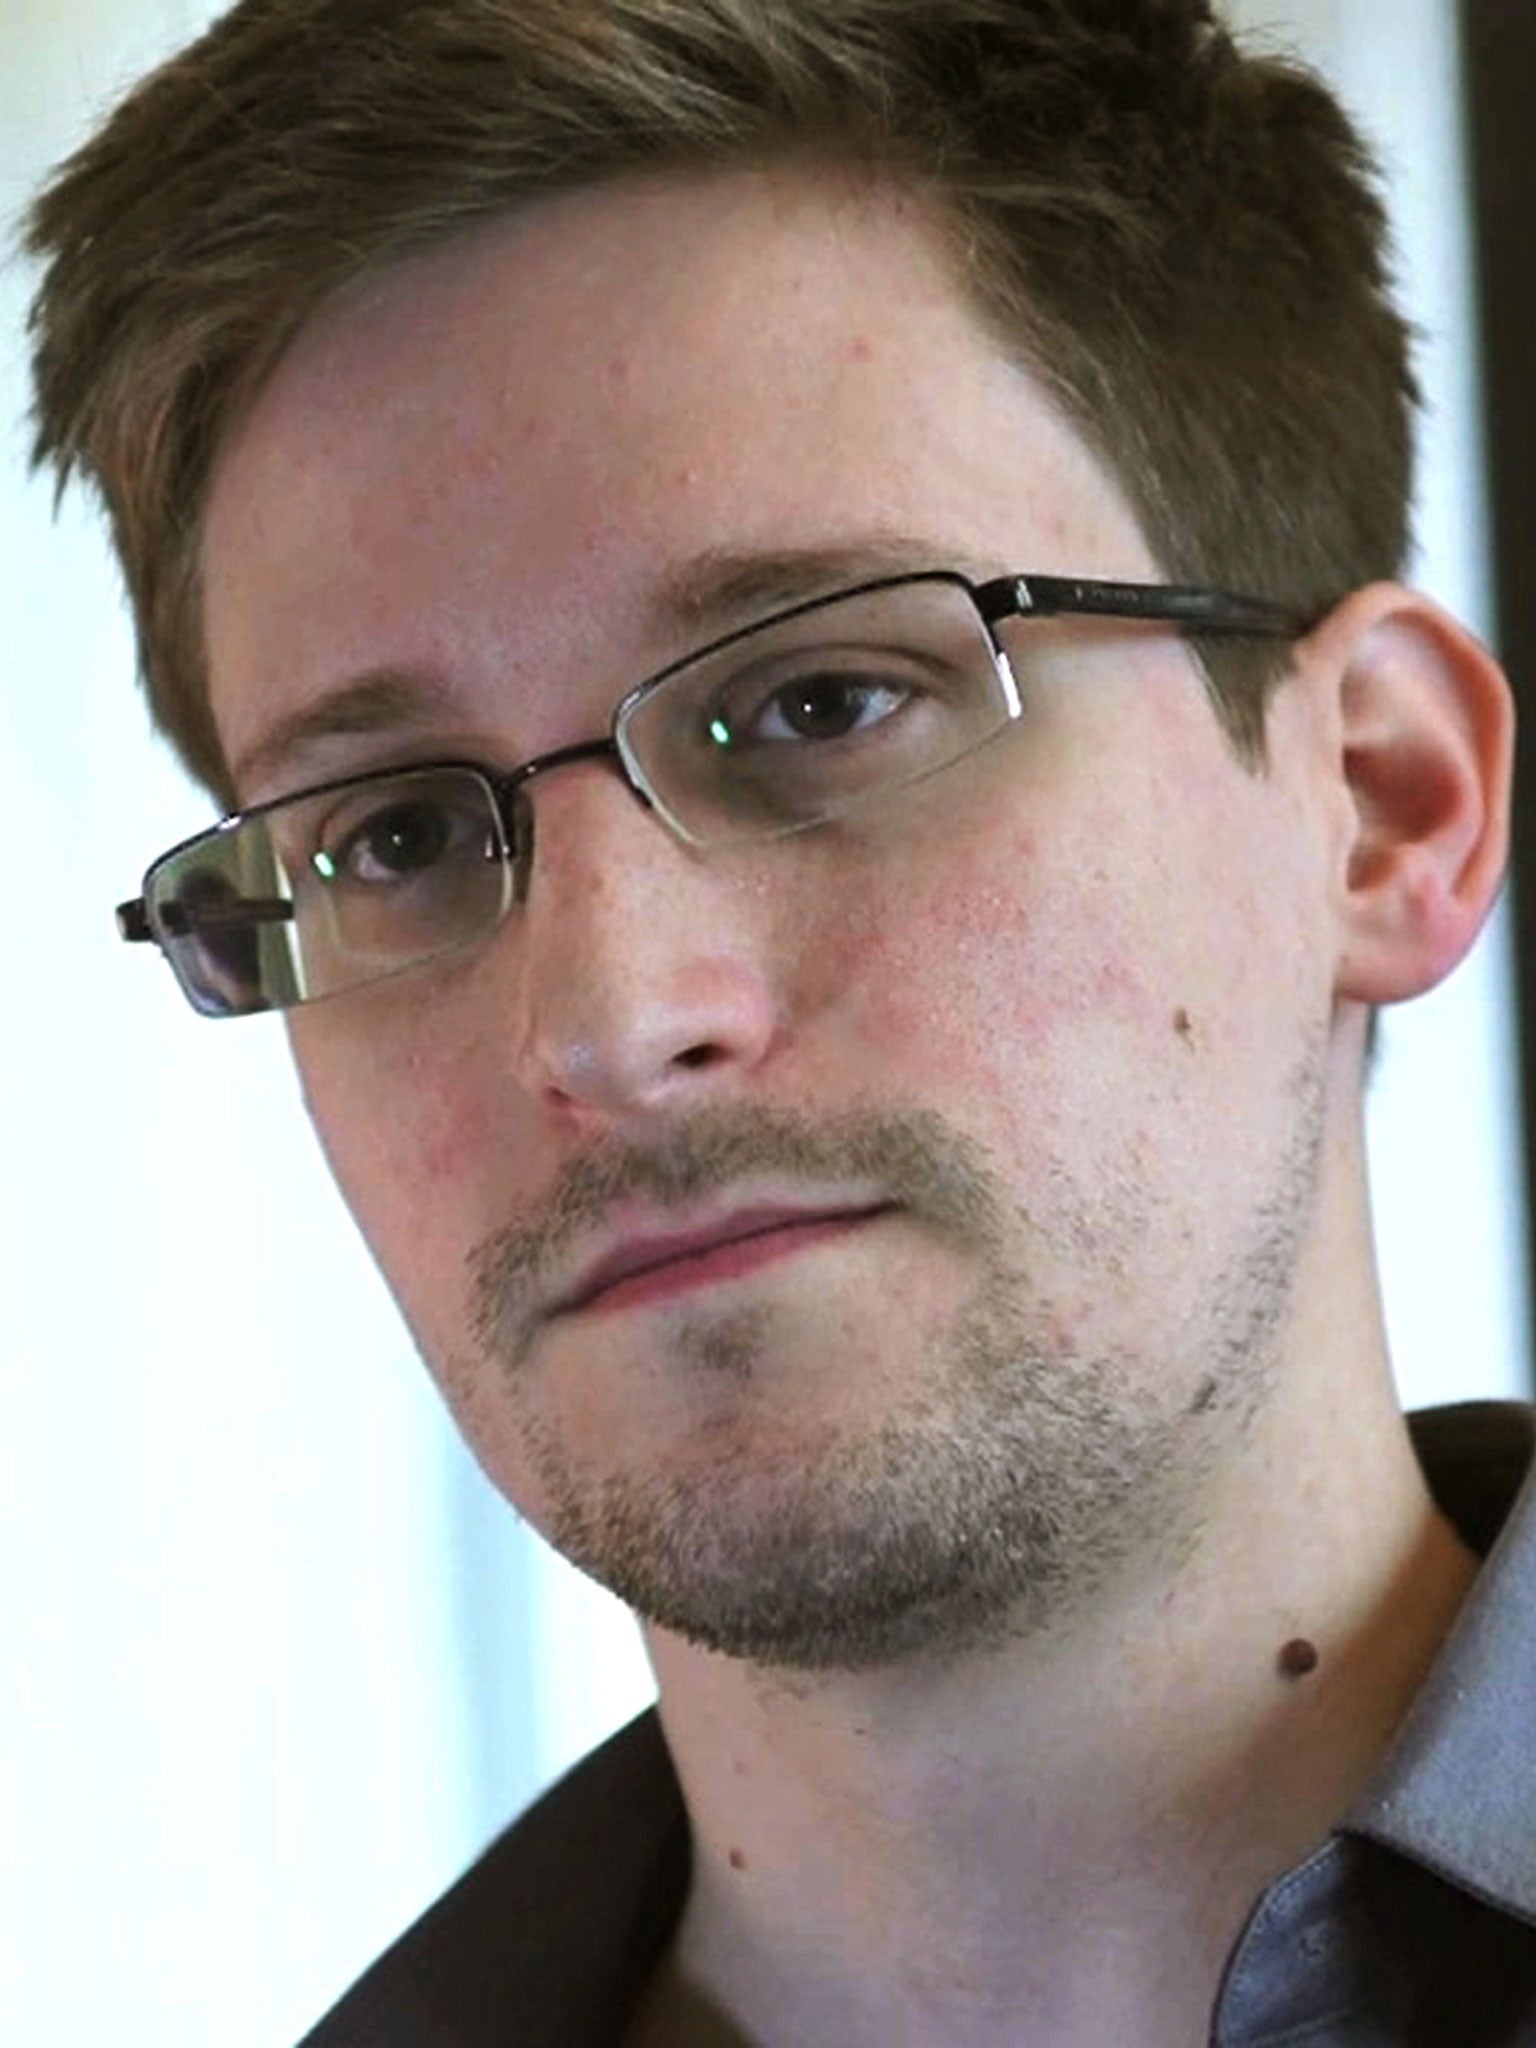 The Washington Post cited an internal audit and other top-secret documents provided earlier this summer from NSA leaker Edward Snowden